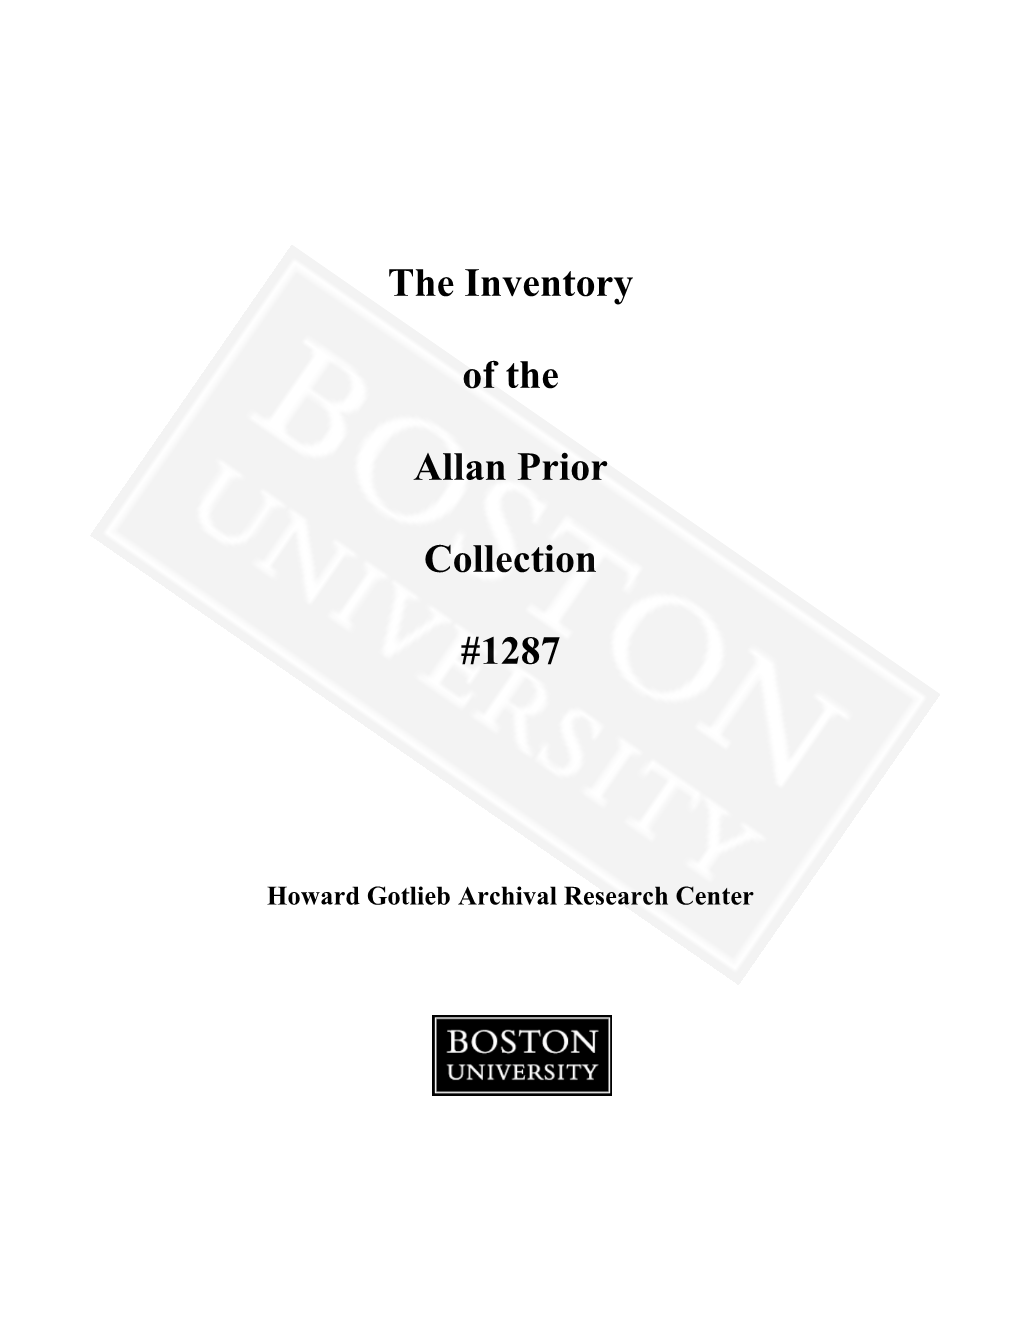 The Inventory of the Allan Prior Collection #1287